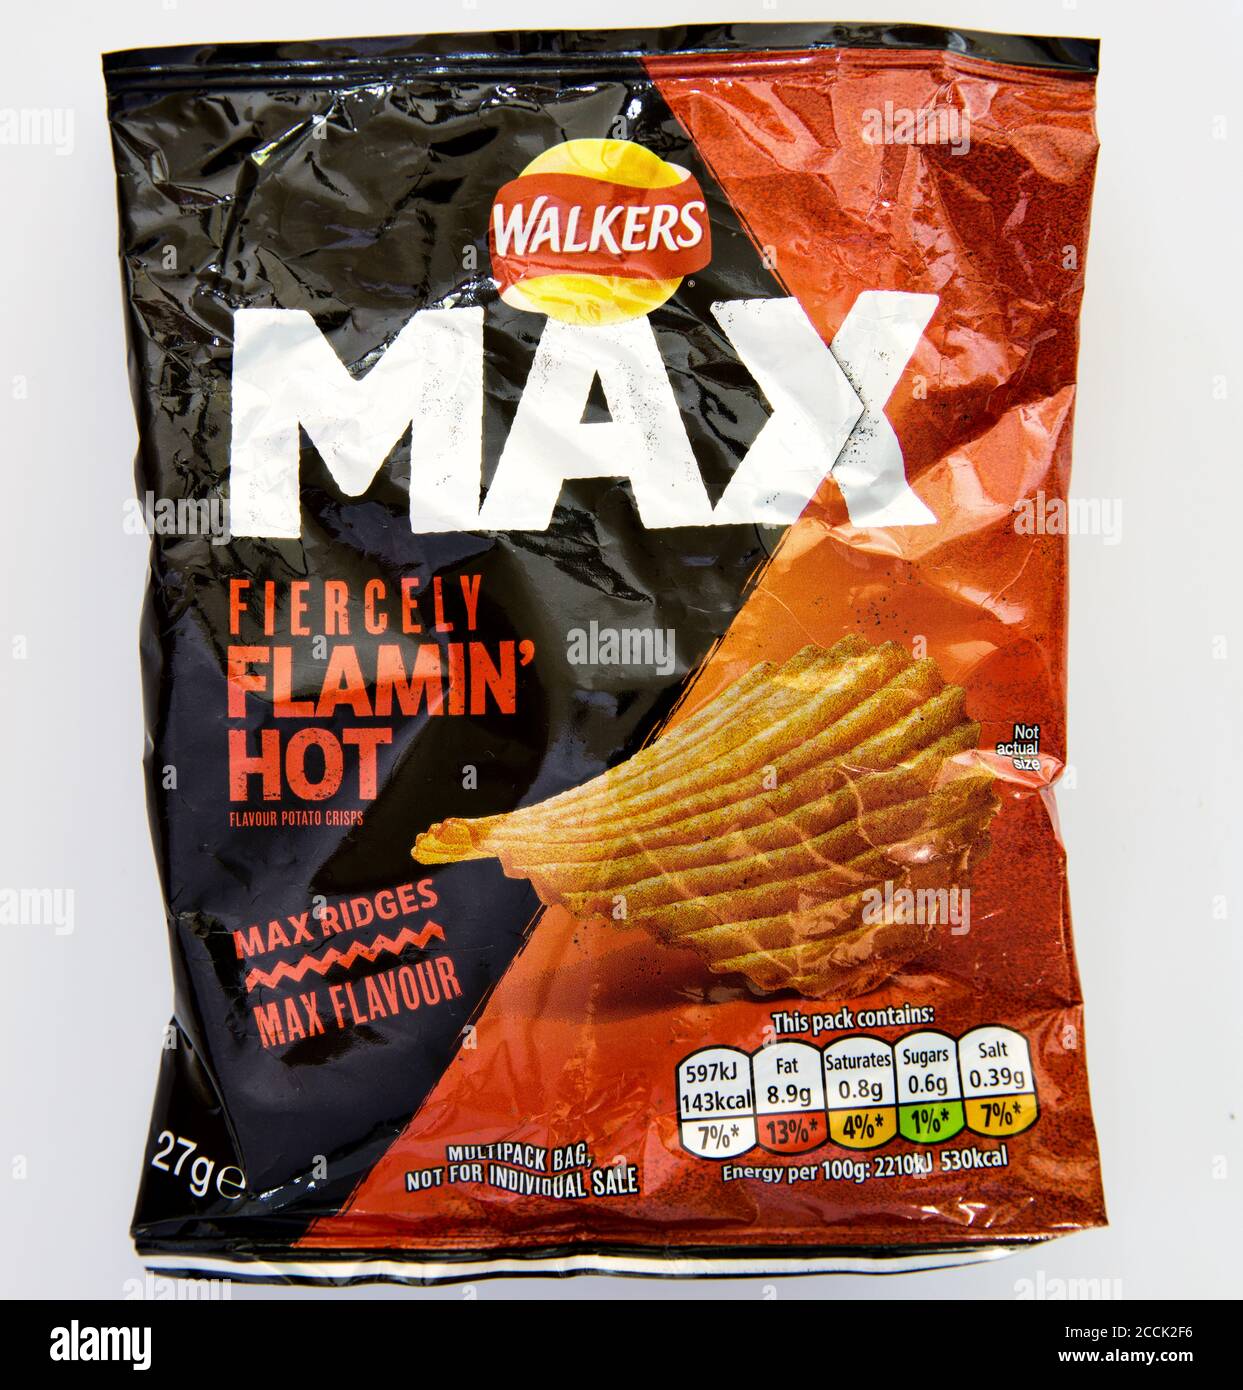 Walkers Max - Fiercely Flamin' Hot crisps Stock Photo